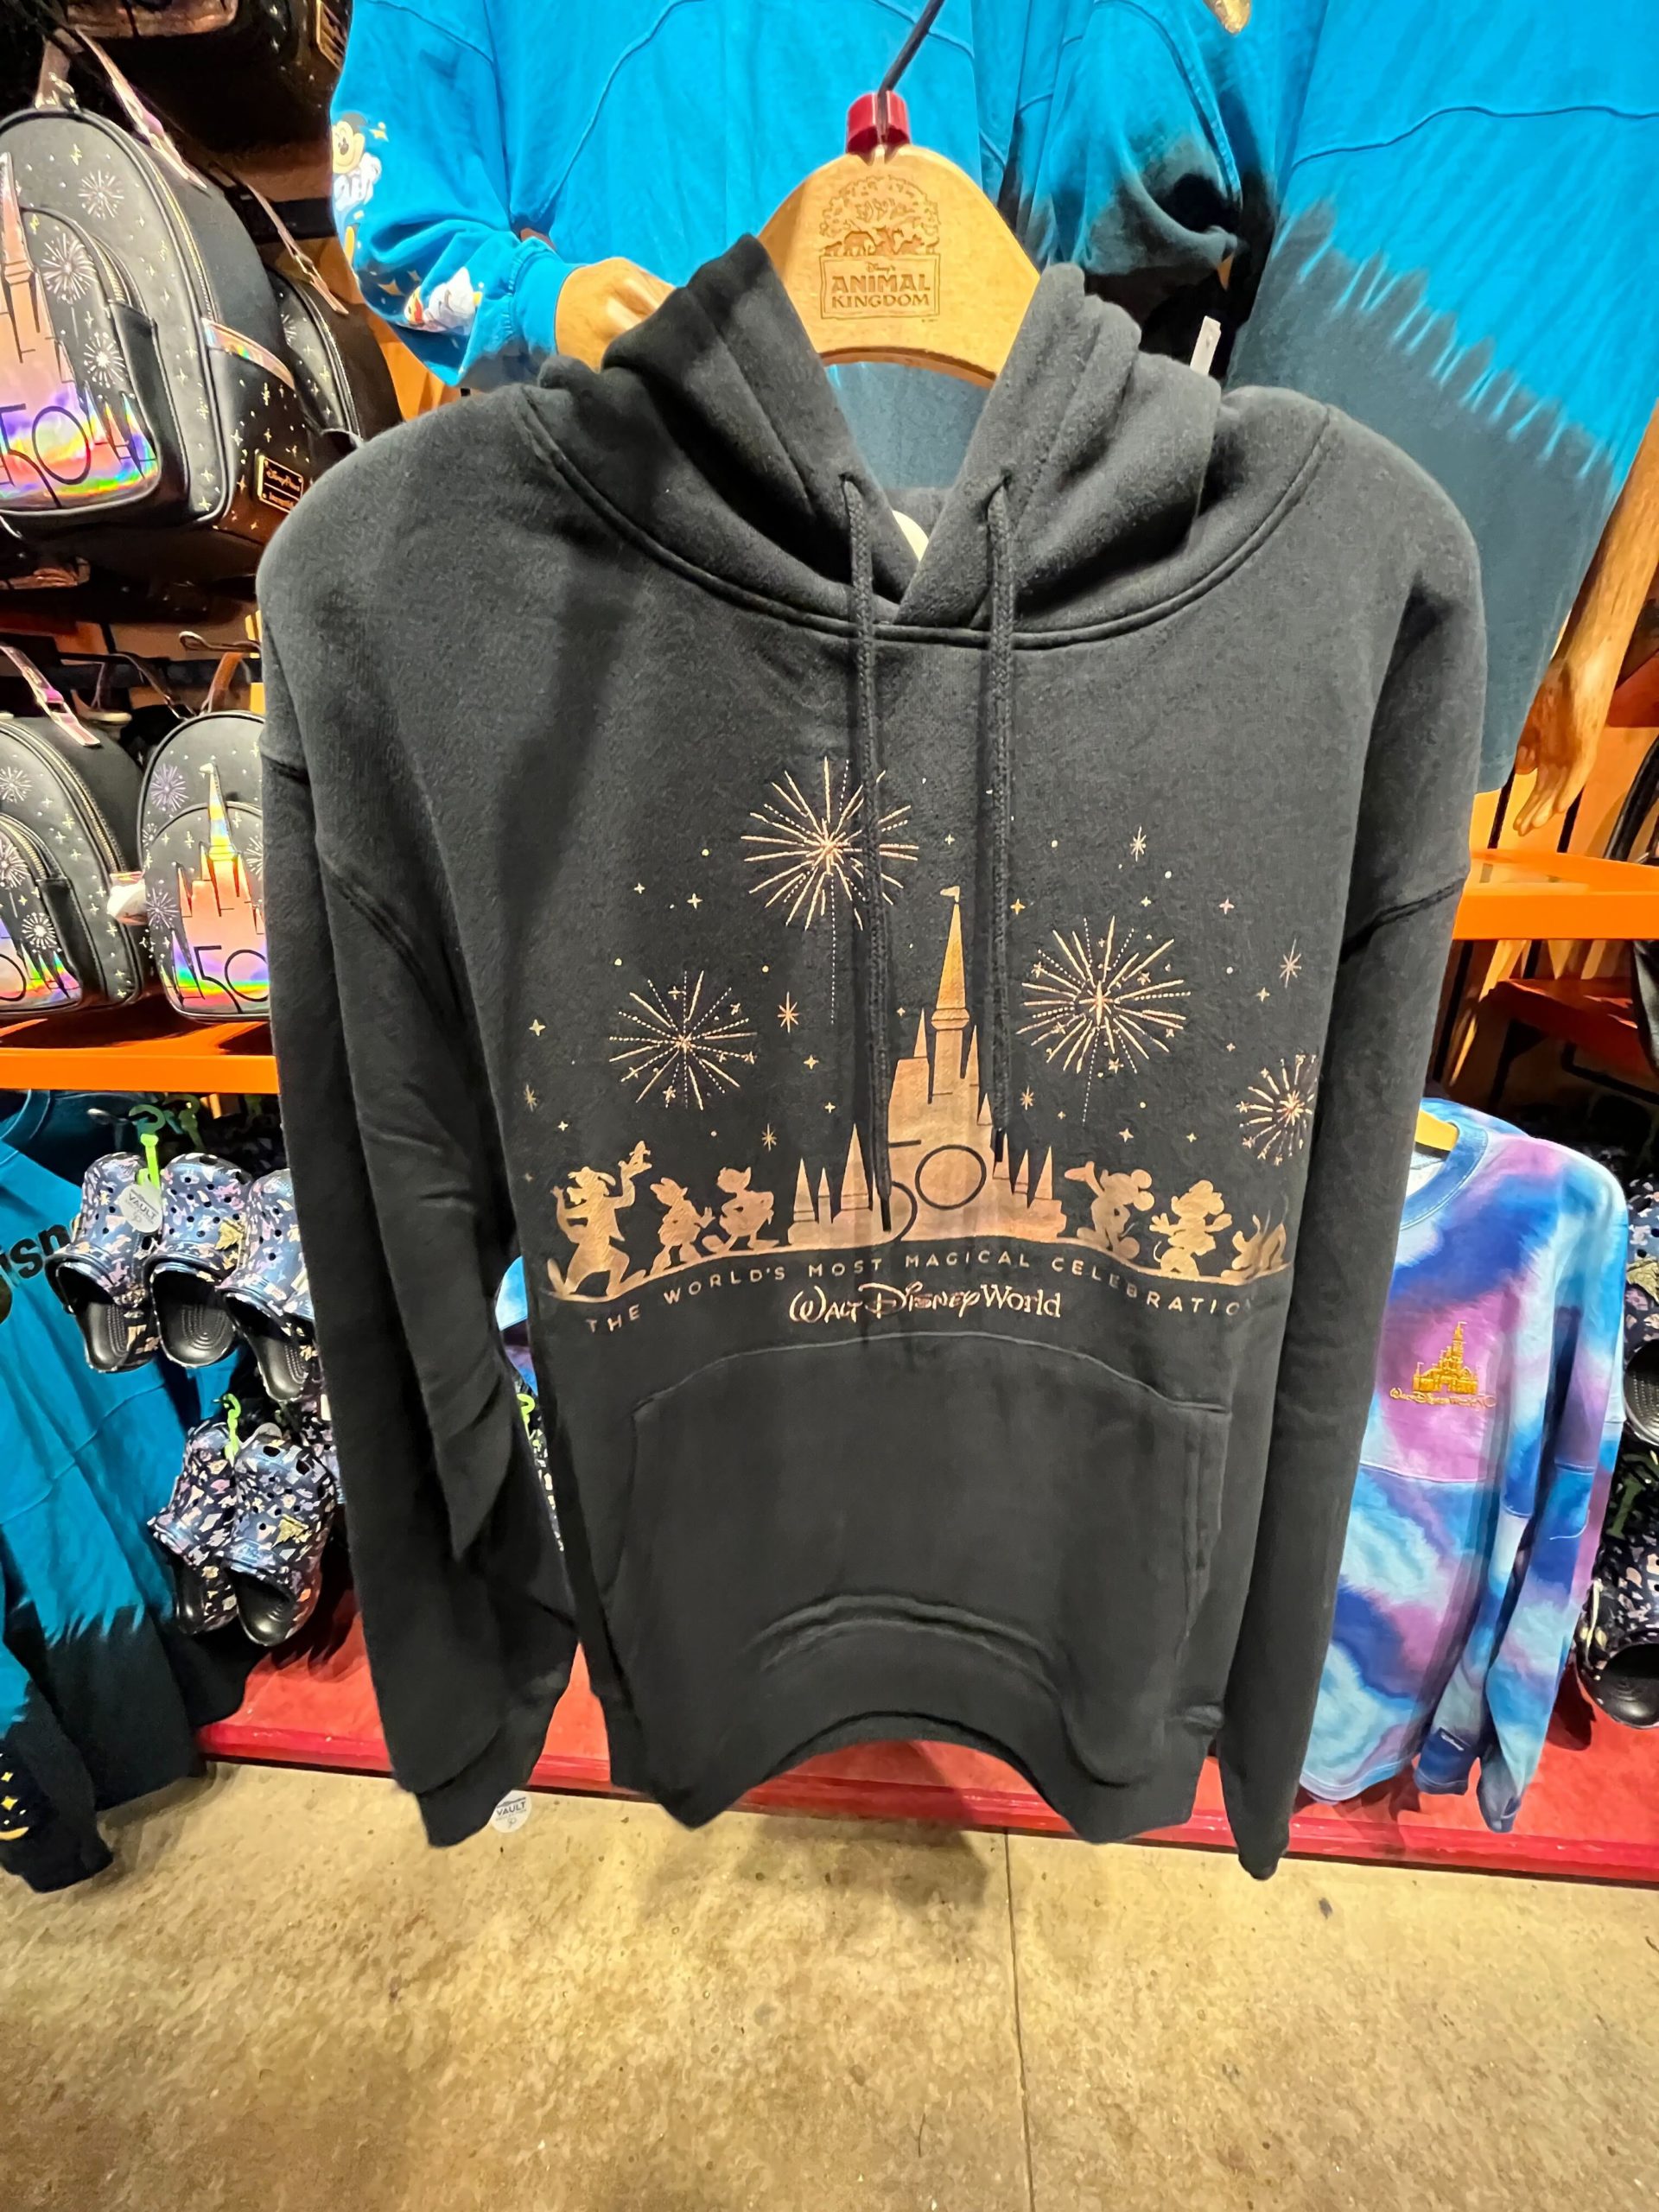 New 50th Anniversary Fireworks Hoodie is Spectacular - MickeyBlog.com